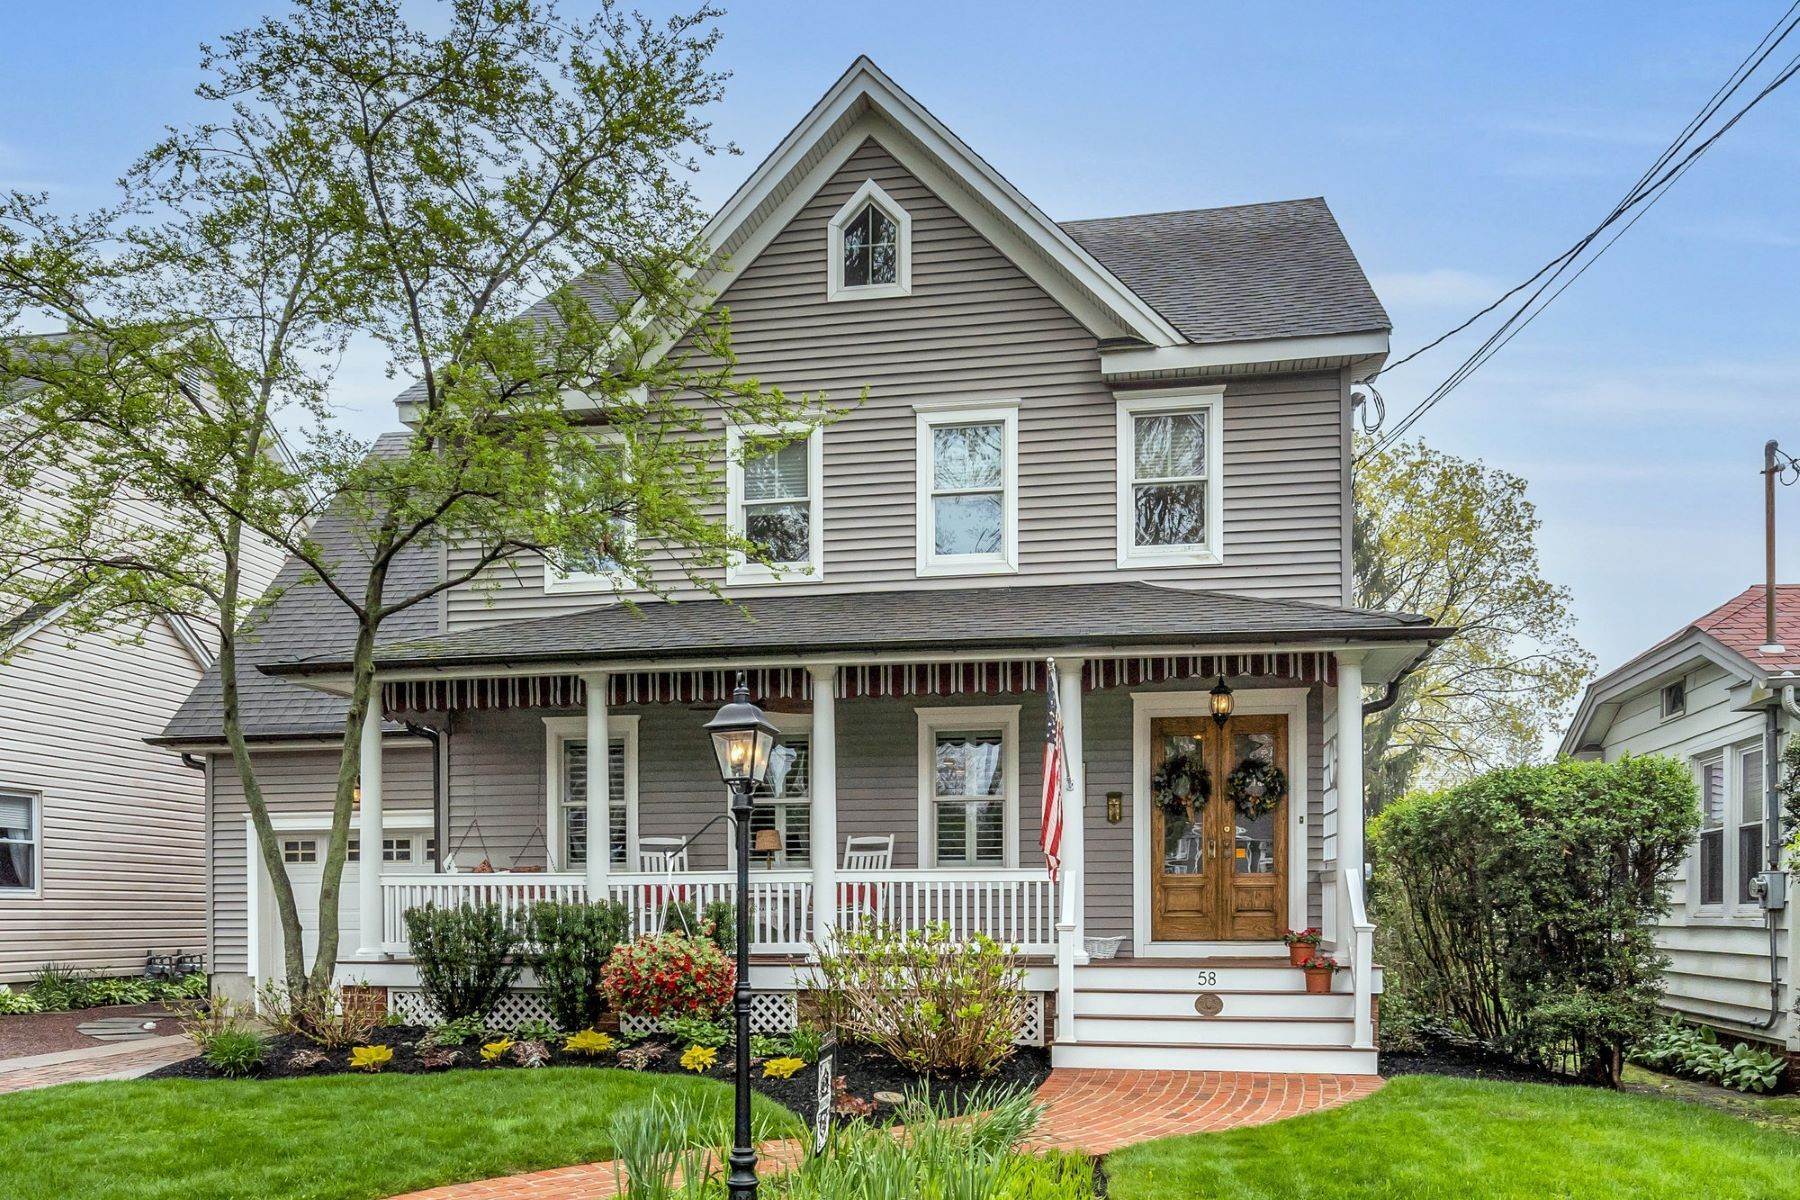 Property for Sale at Charming Custom Colonial 58 Morris Avenue Manasquan, New Jersey 08736 United States